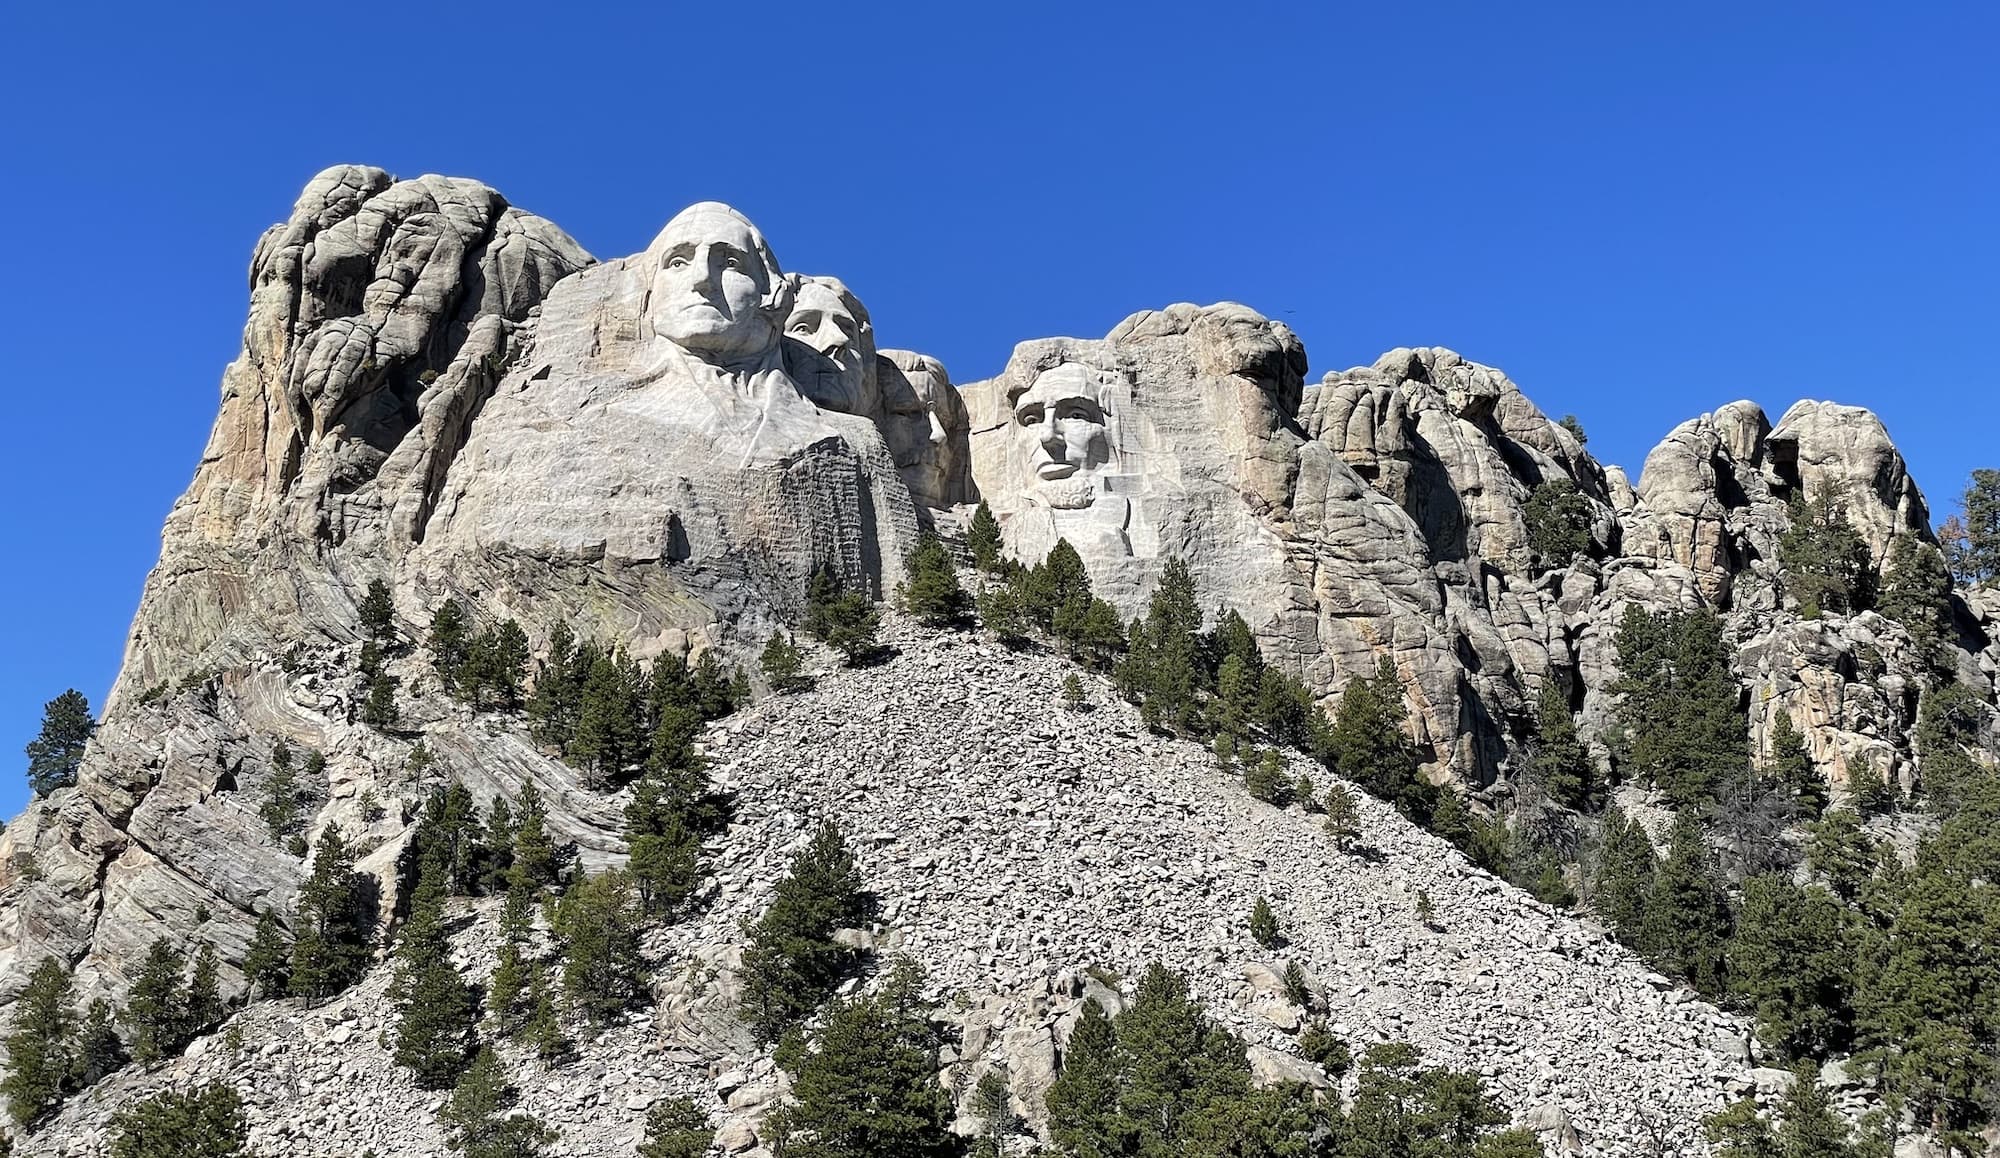 Looking up at Mount Rushmore